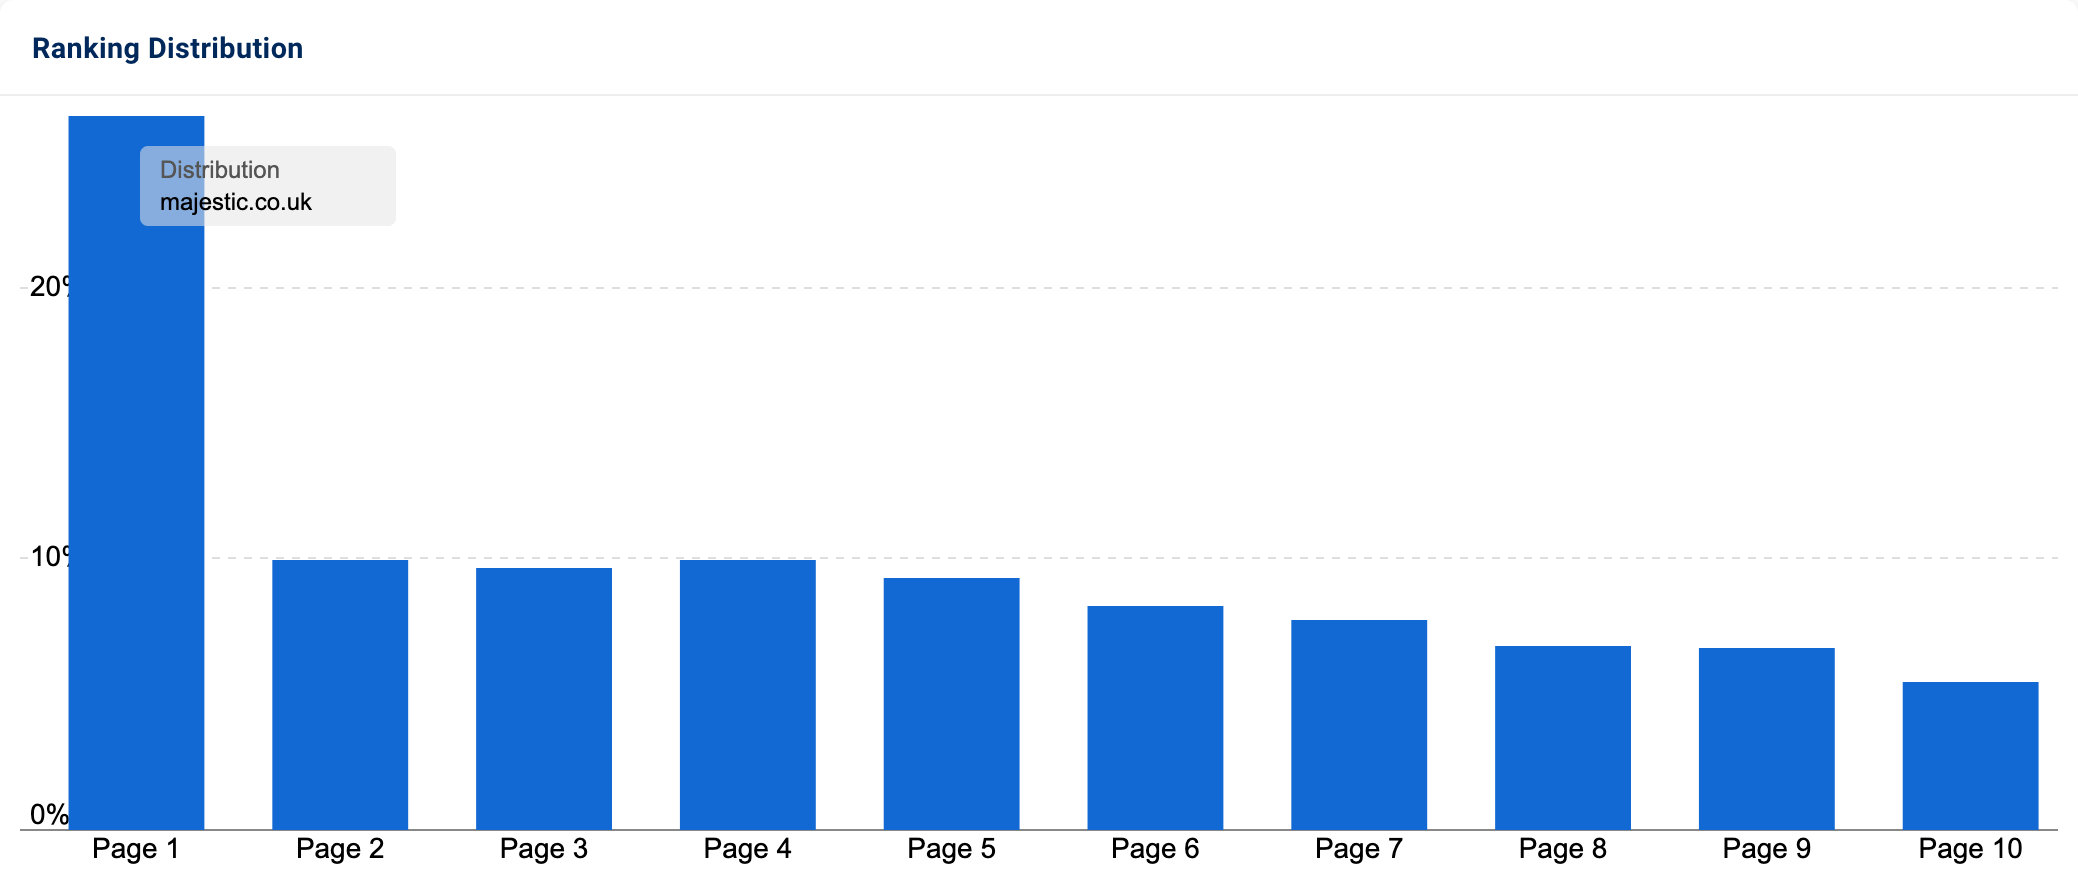 Majestic's ranking distribution over Google's first 10 result pages.